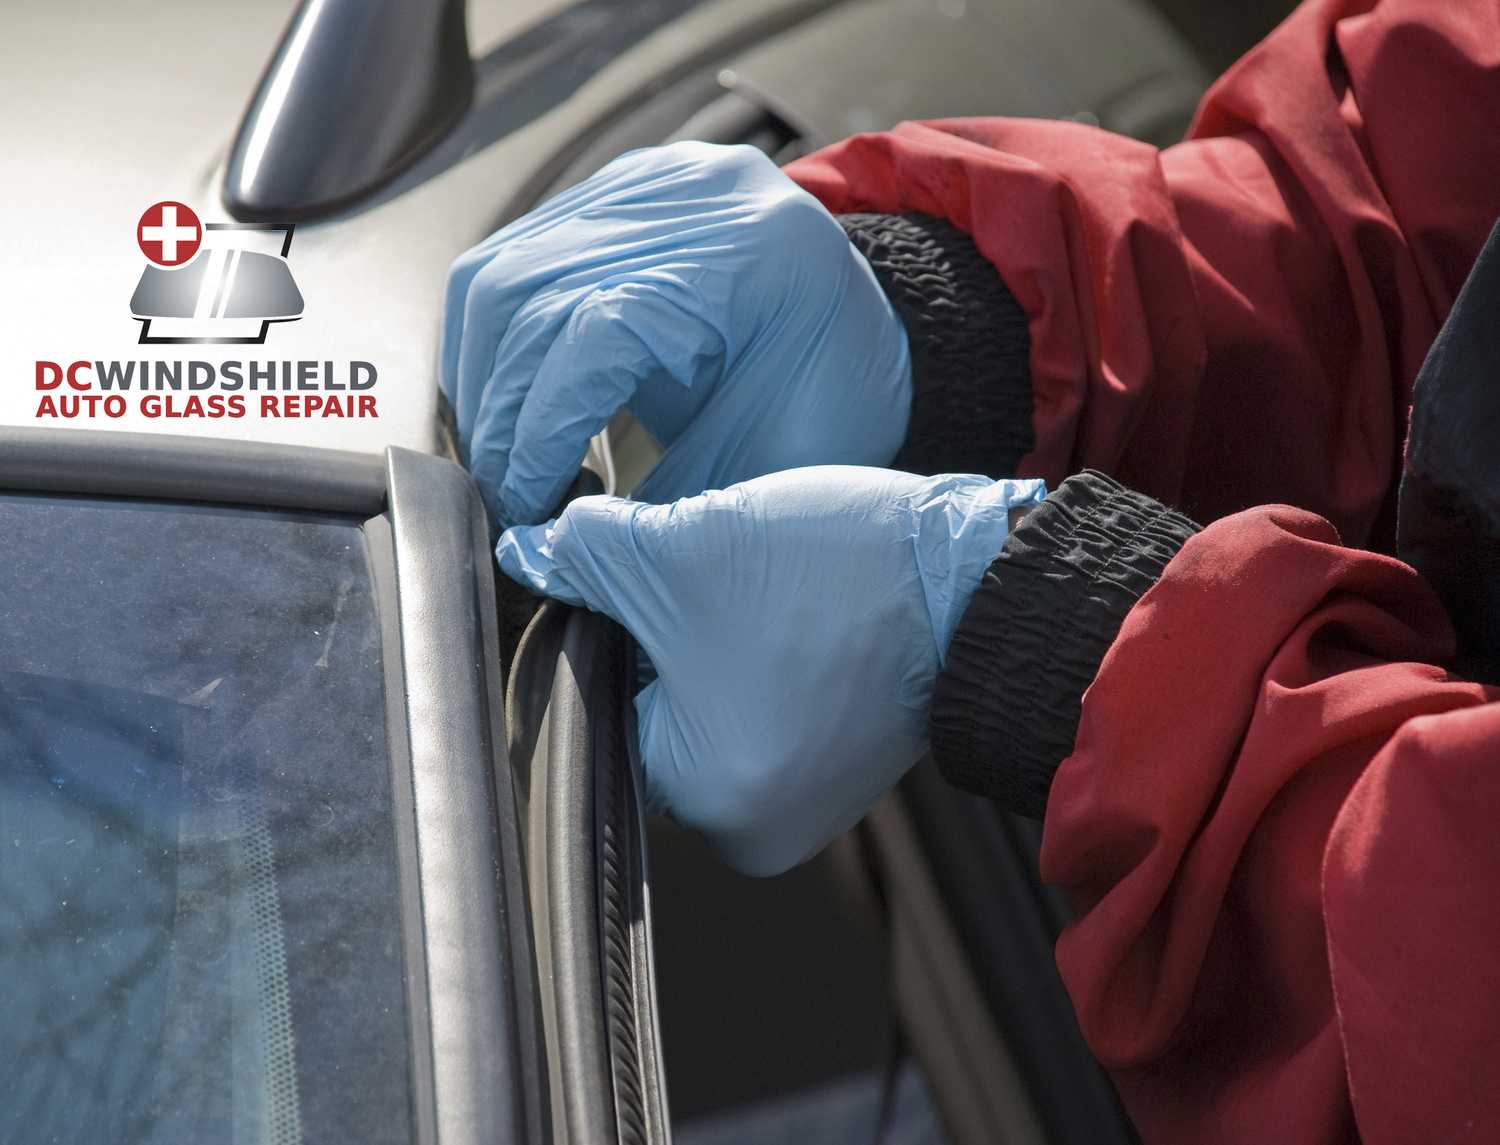 DC-windshield-auto-car-glass-repair-replacement-2.jpeg